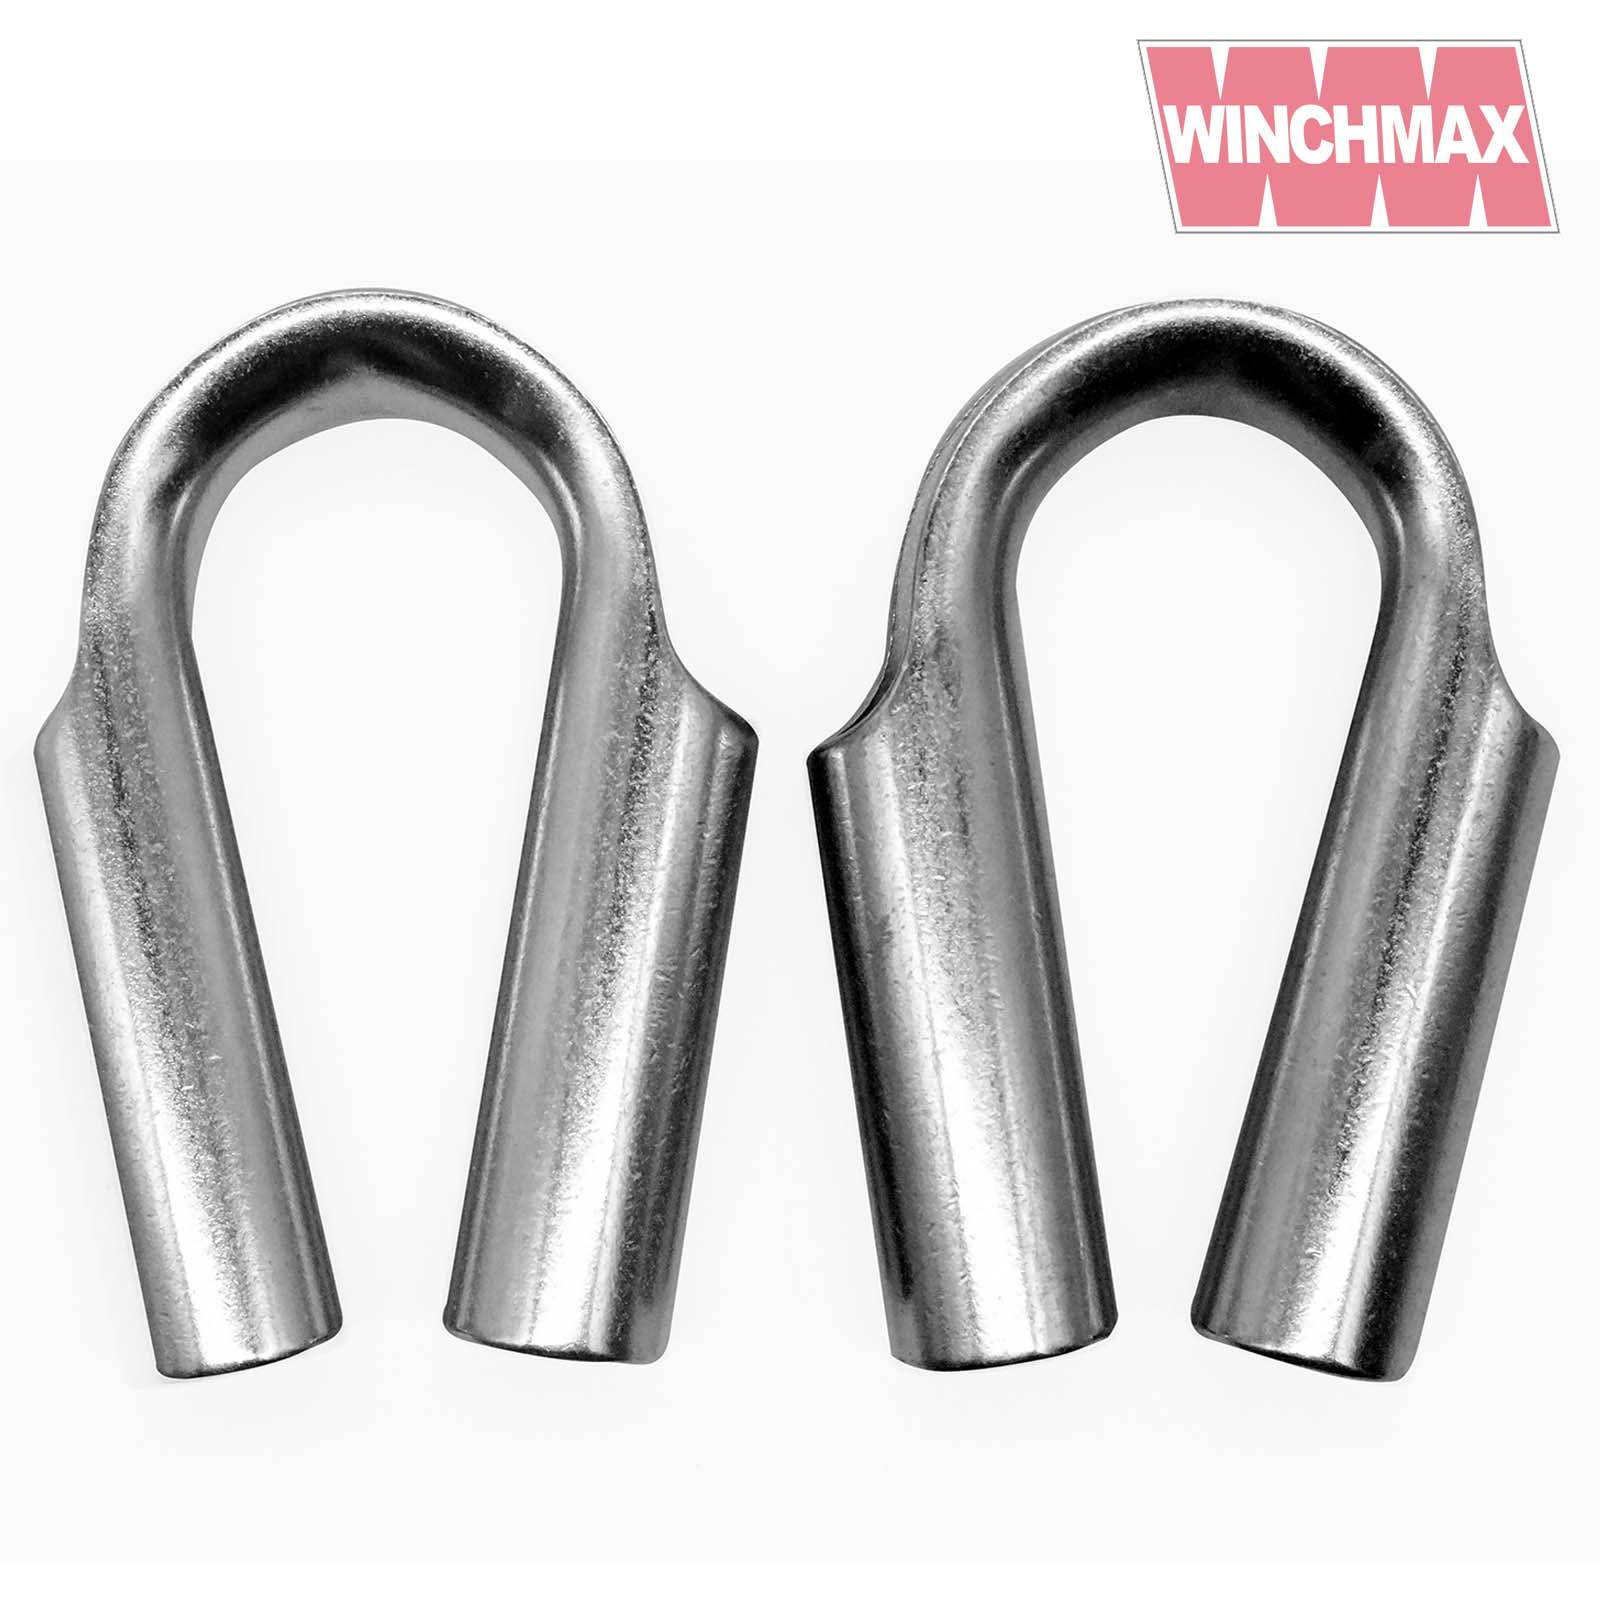 Pack of 2 Ranger 12MM 1/2 Stainless Steel Rope Tube Thimble with Gusset for 3/8 or 1/2 Wire or Synthetic Winch Rope by Ultranger Diameter of 